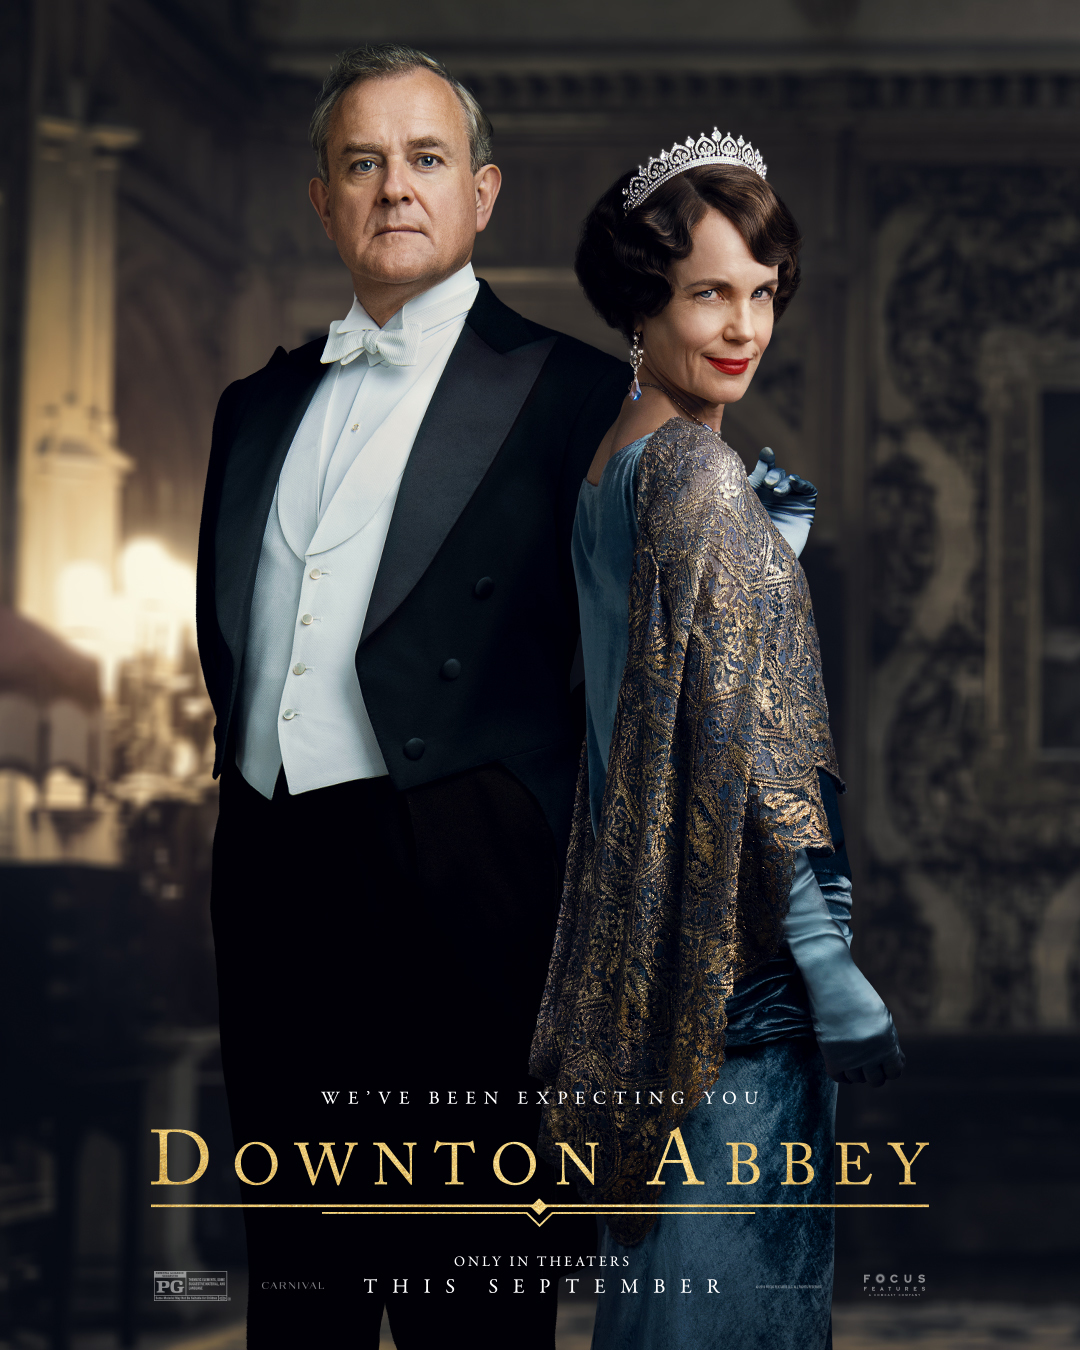 <p>The Earl and Countess of Grantham -- played by Hugh Bonneville and Elizabeth McGovern -- are seen here in their most glamorous 1927 looks on a promotional poster for 2019's "Downton Abbey" film. The movie's costume designer joked that she had to source more jewels than ever for the characters' big-screen debut. "It was the tiara show," she told <a href="https://fashionista.com/2019/09/downton-abbey-movie-costumes">Fashionista</a>. "I had to cast my net a lot wider because I needed so many of them," including the one worn by American heiress Cora Crawley seen here.</p>